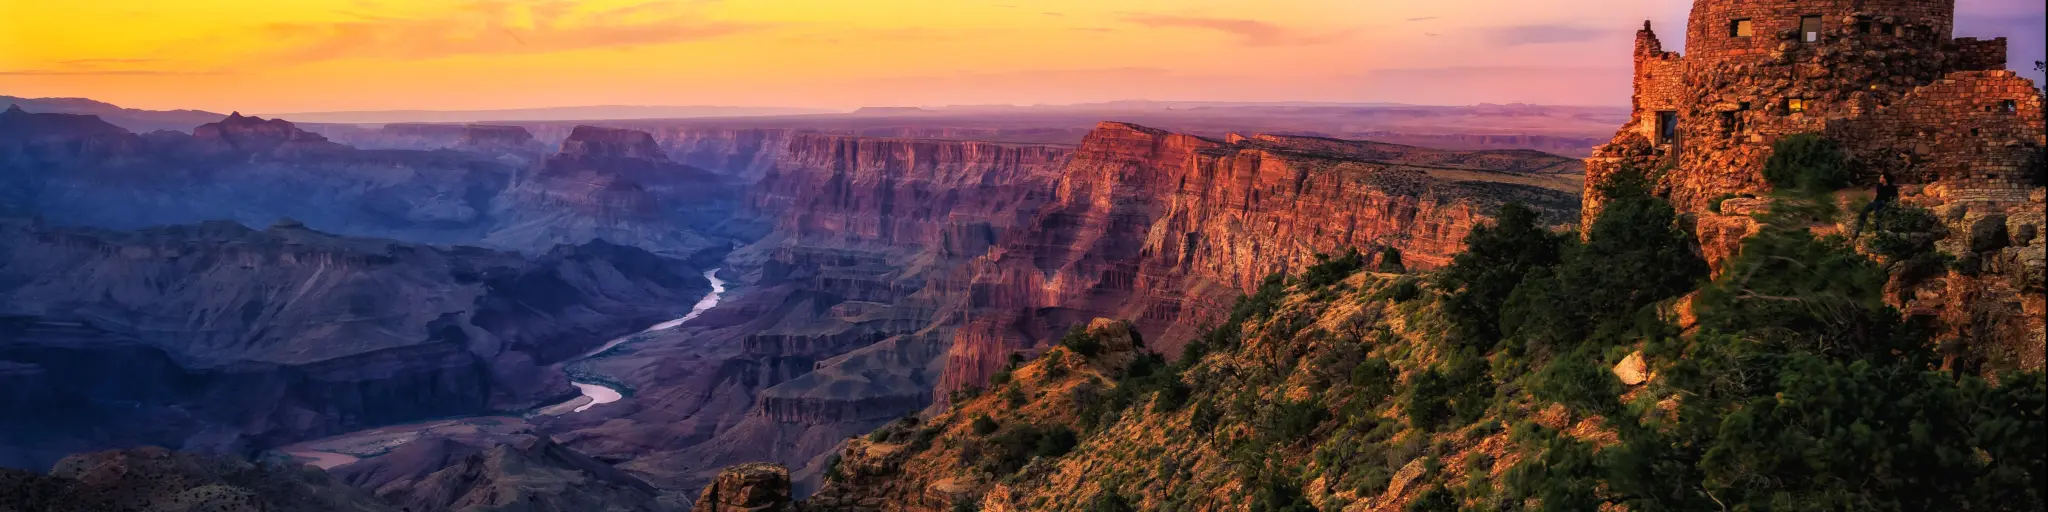 Grand Canyon, Grand Canyon National Park, Arizona with the Watchtower in the foreground at sunset overlooking the great valley, rocks and river below.